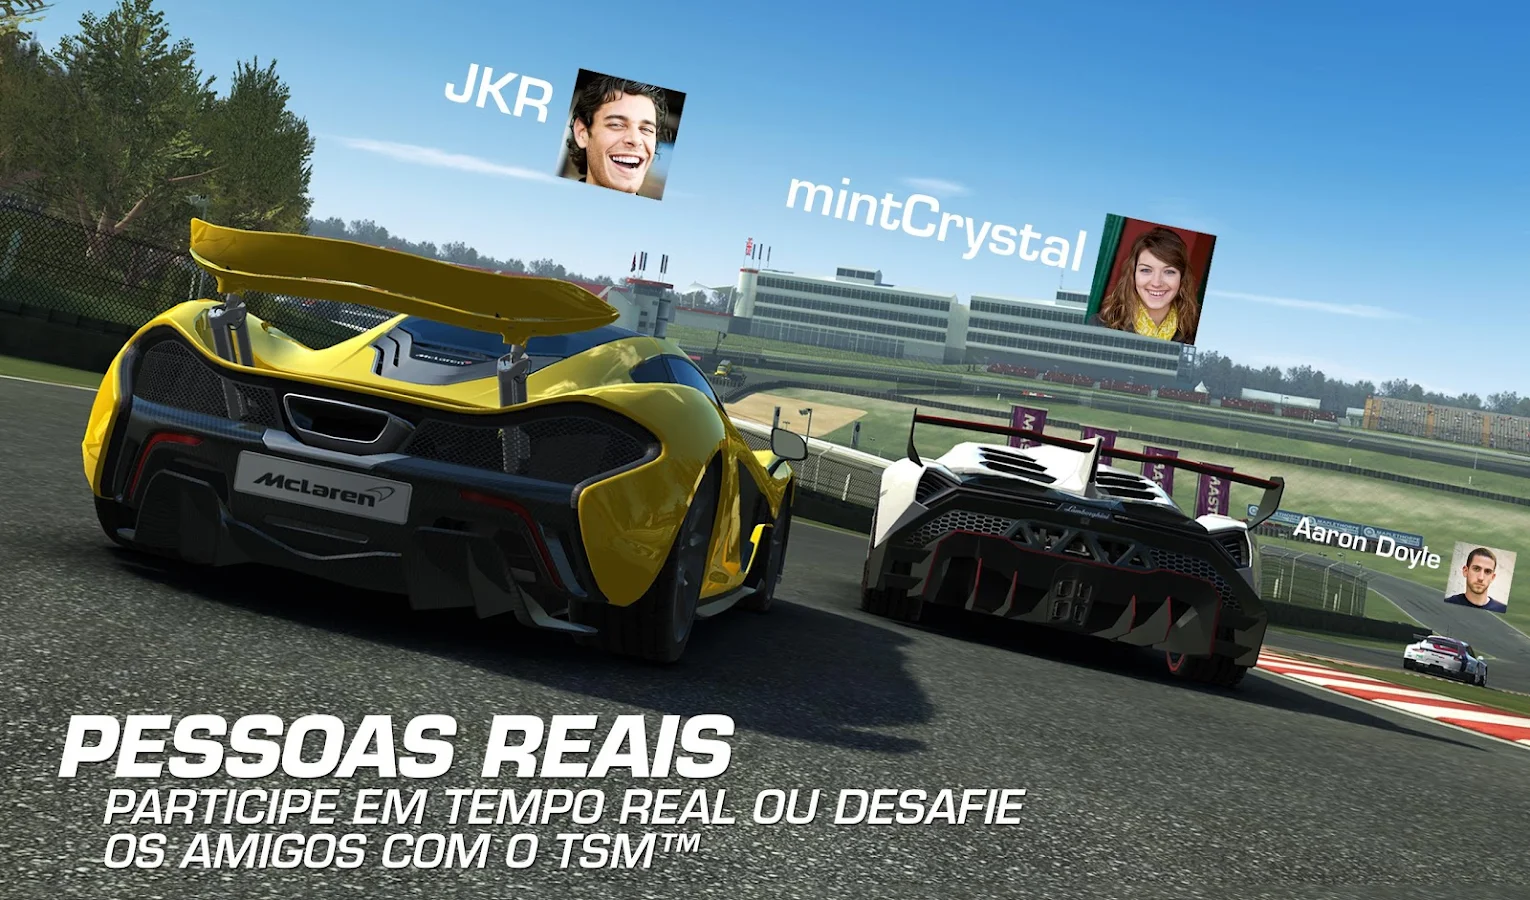 Download - Real Racing 3 v7.0.5 Apk Mod [Dinheiro Inifinito] - Winew